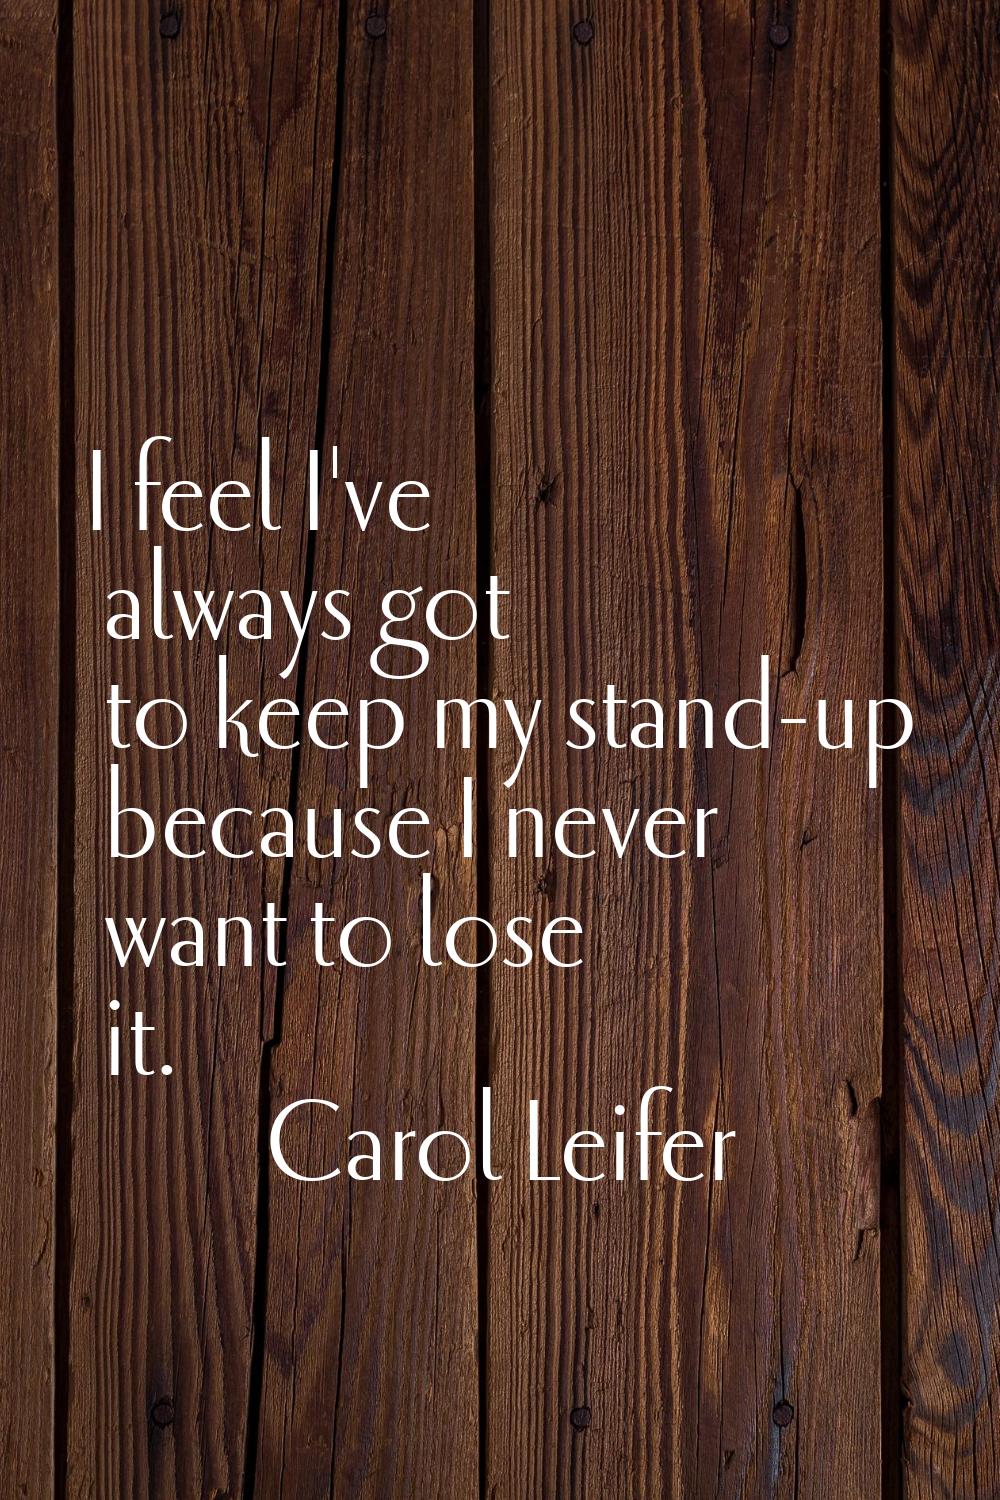 I feel I've always got to keep my stand-up because I never want to lose it.